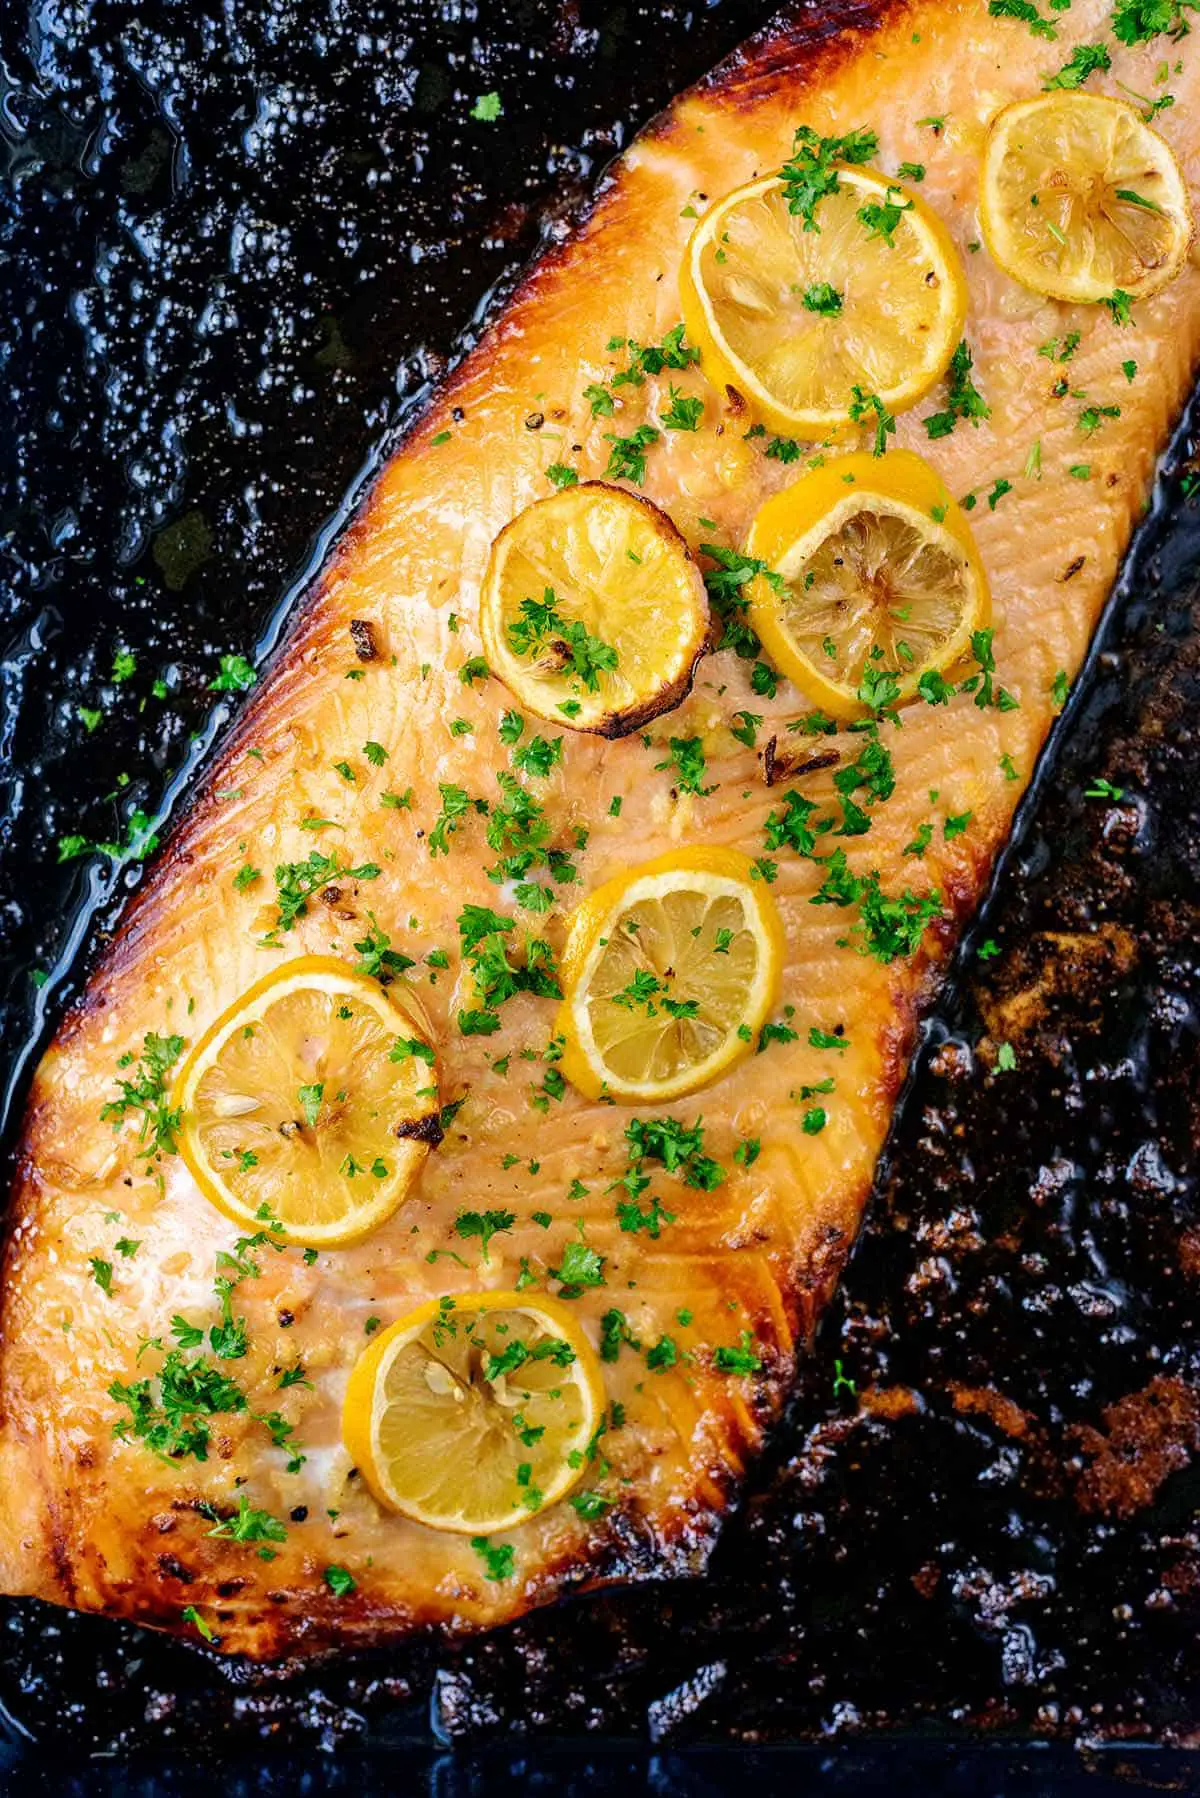 A full side of cooked salmon topped with slices of lemon.